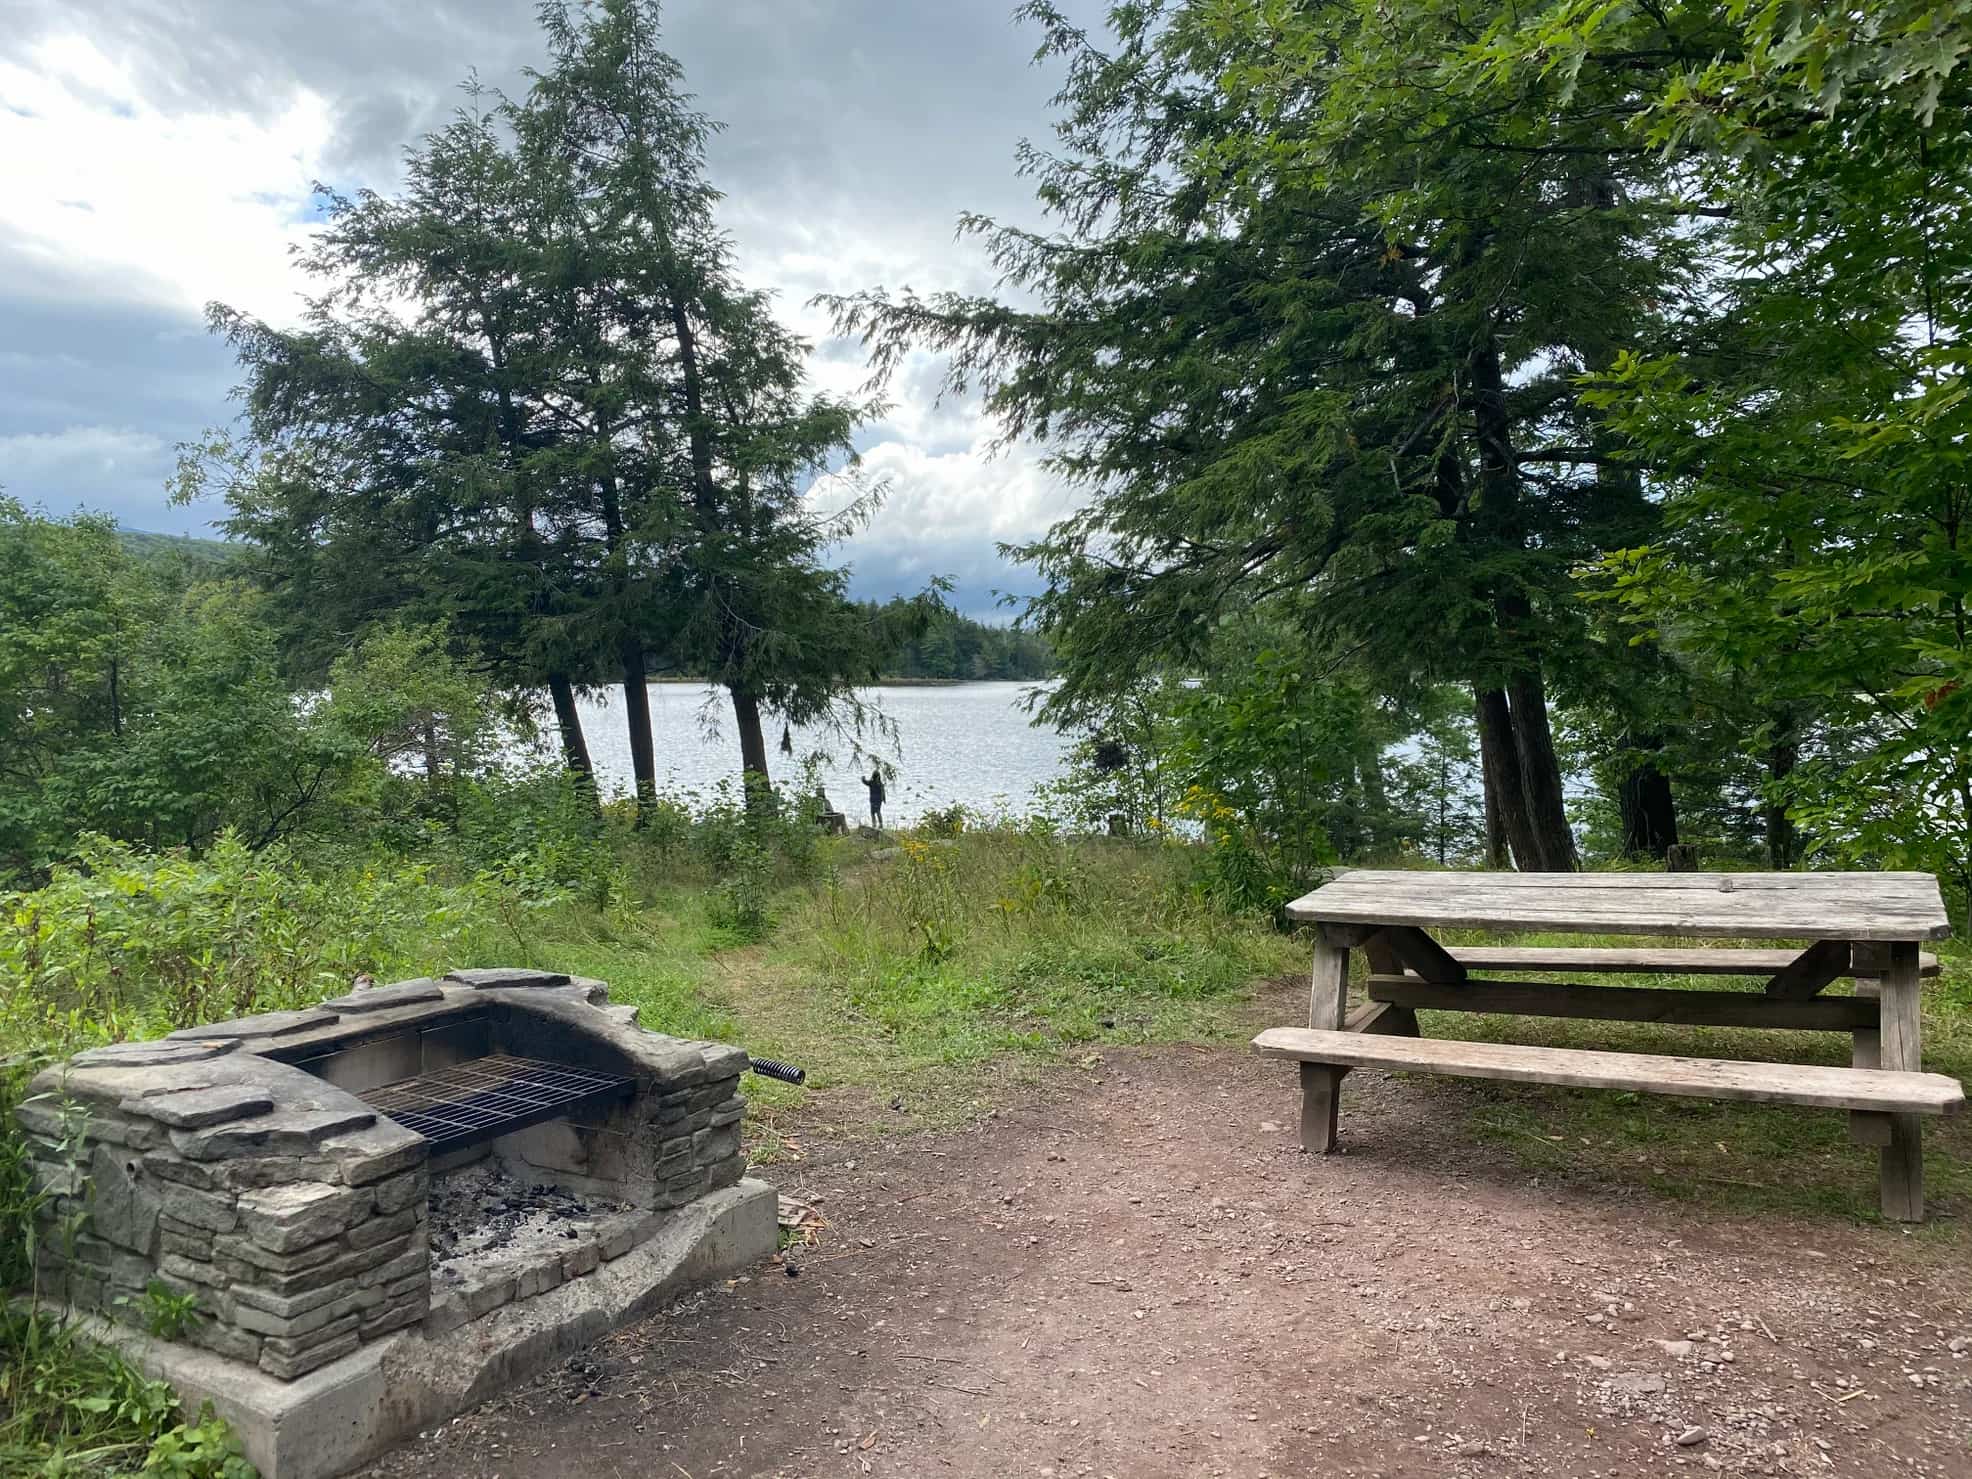 Rock sided fire pit and picnic table at campsite overlooking North-South Lake.